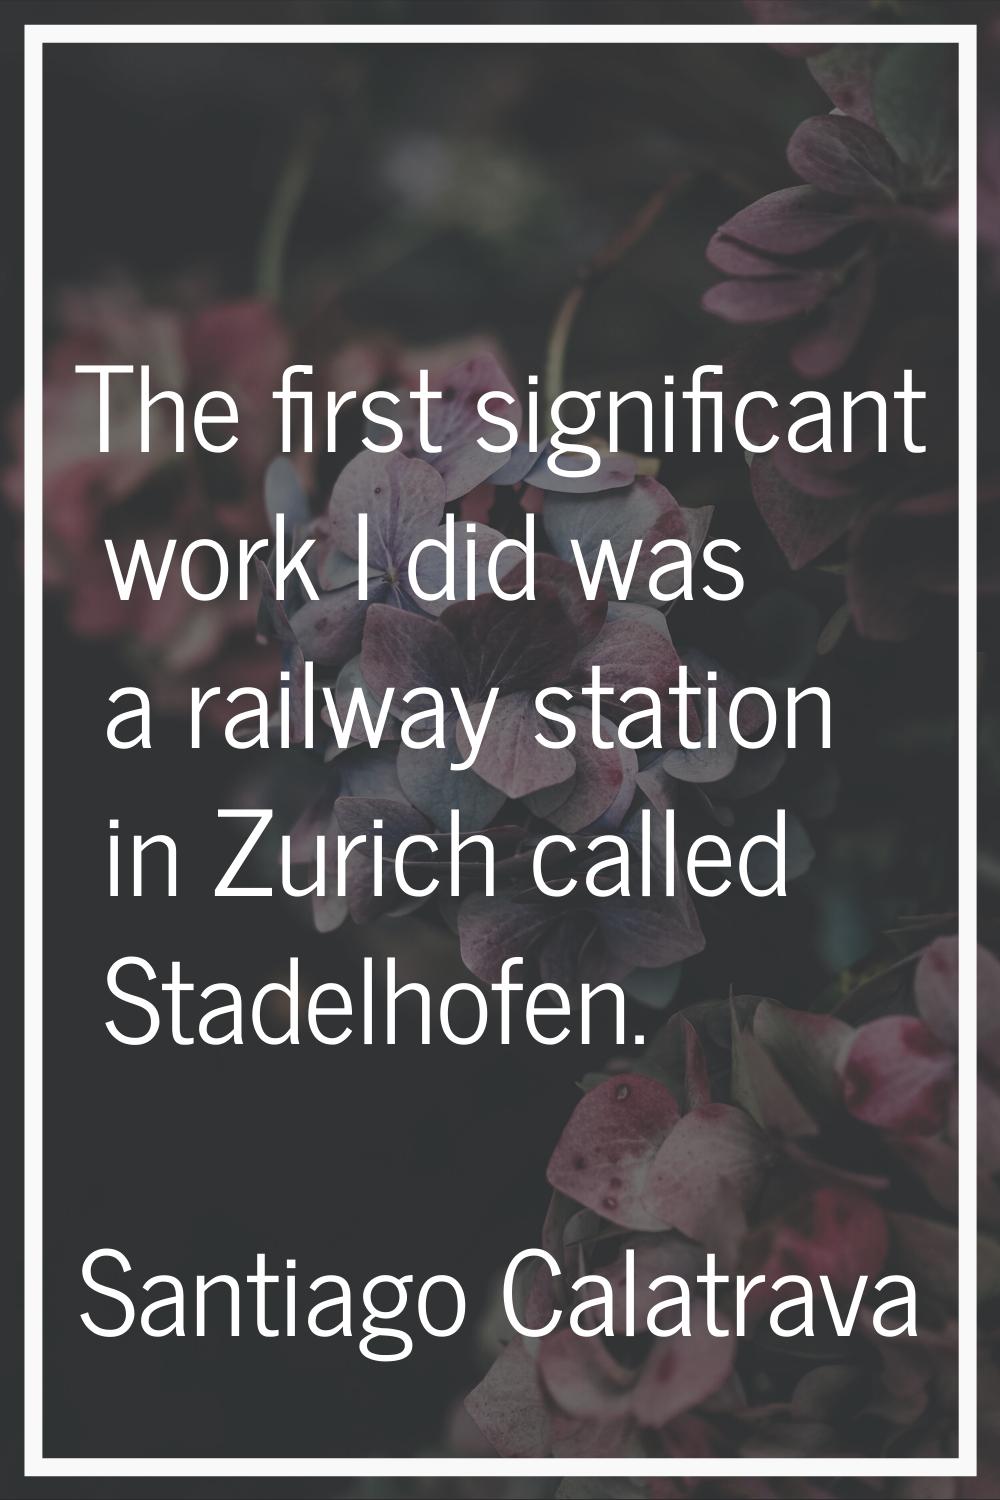 The first significant work I did was a railway station in Zurich called Stadelhofen.